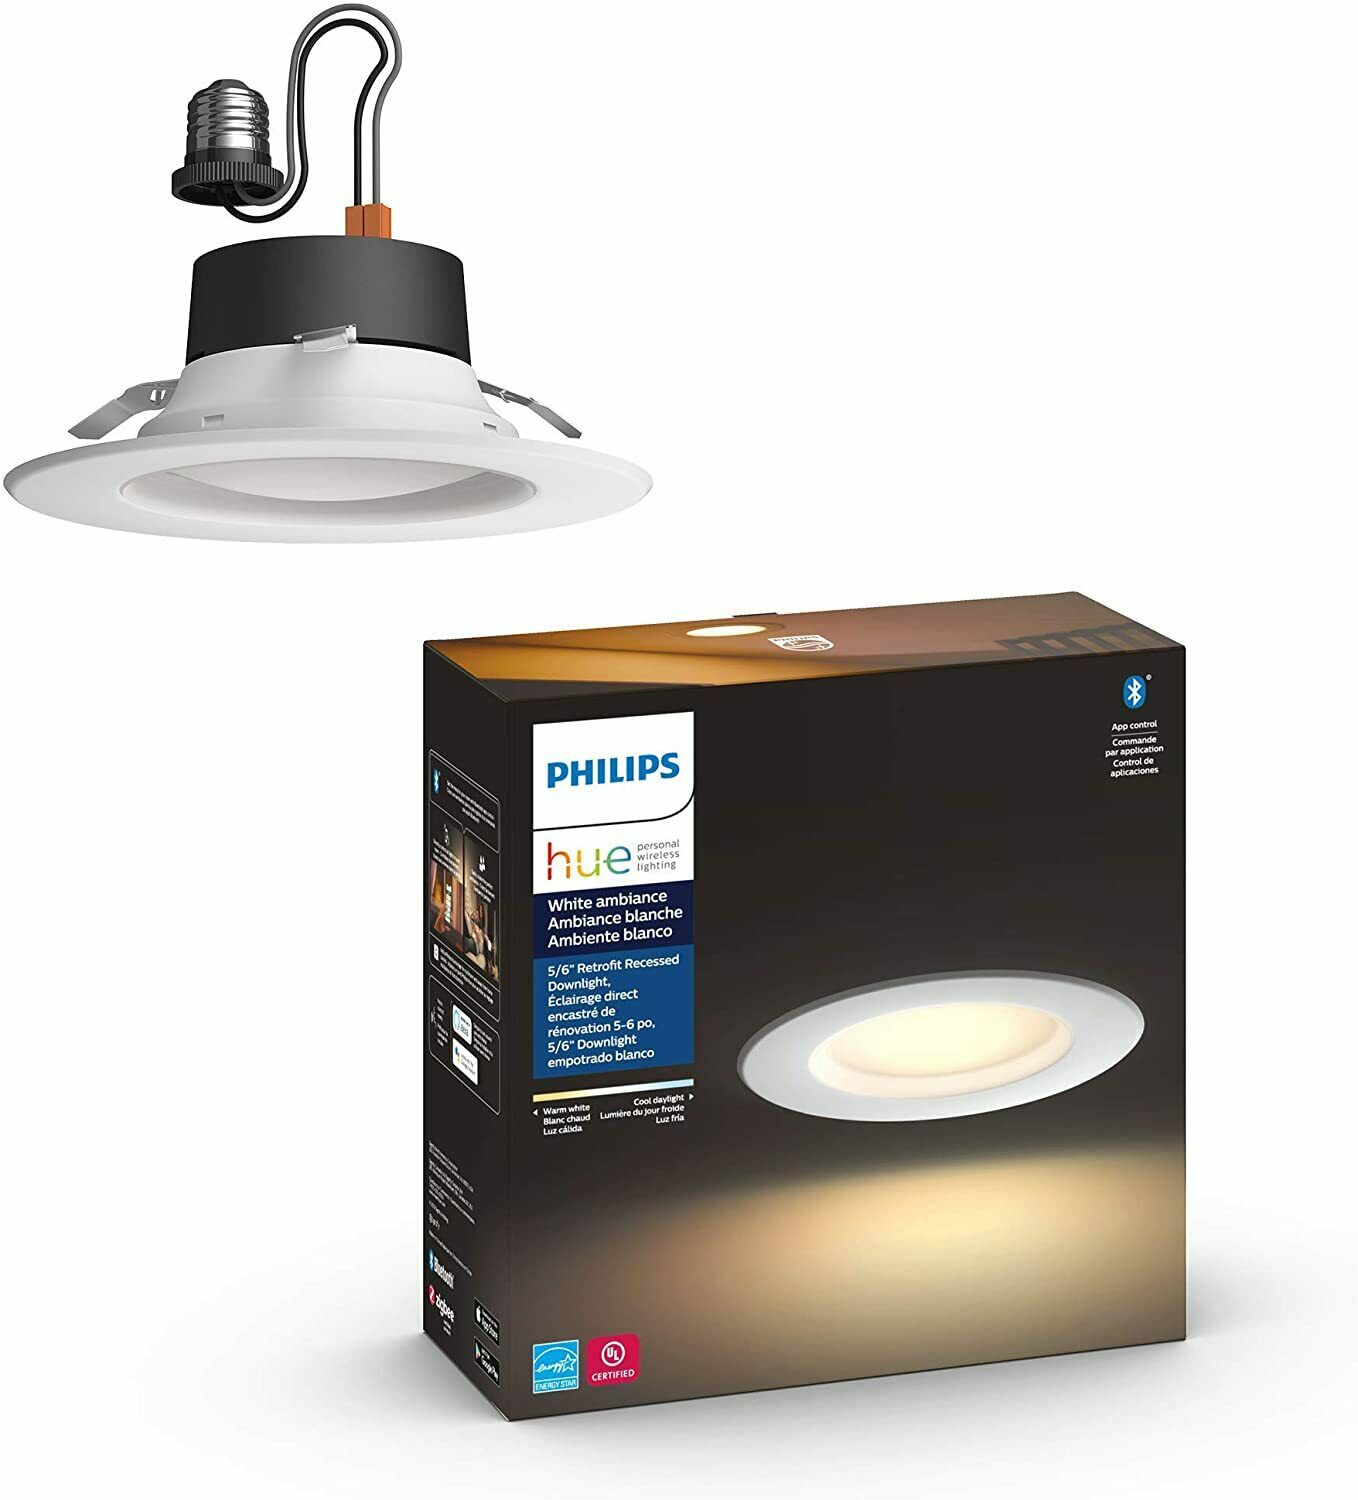 Philips Hue White Ambiance Led Smart Retrofit 5/6" Recessed Downlight